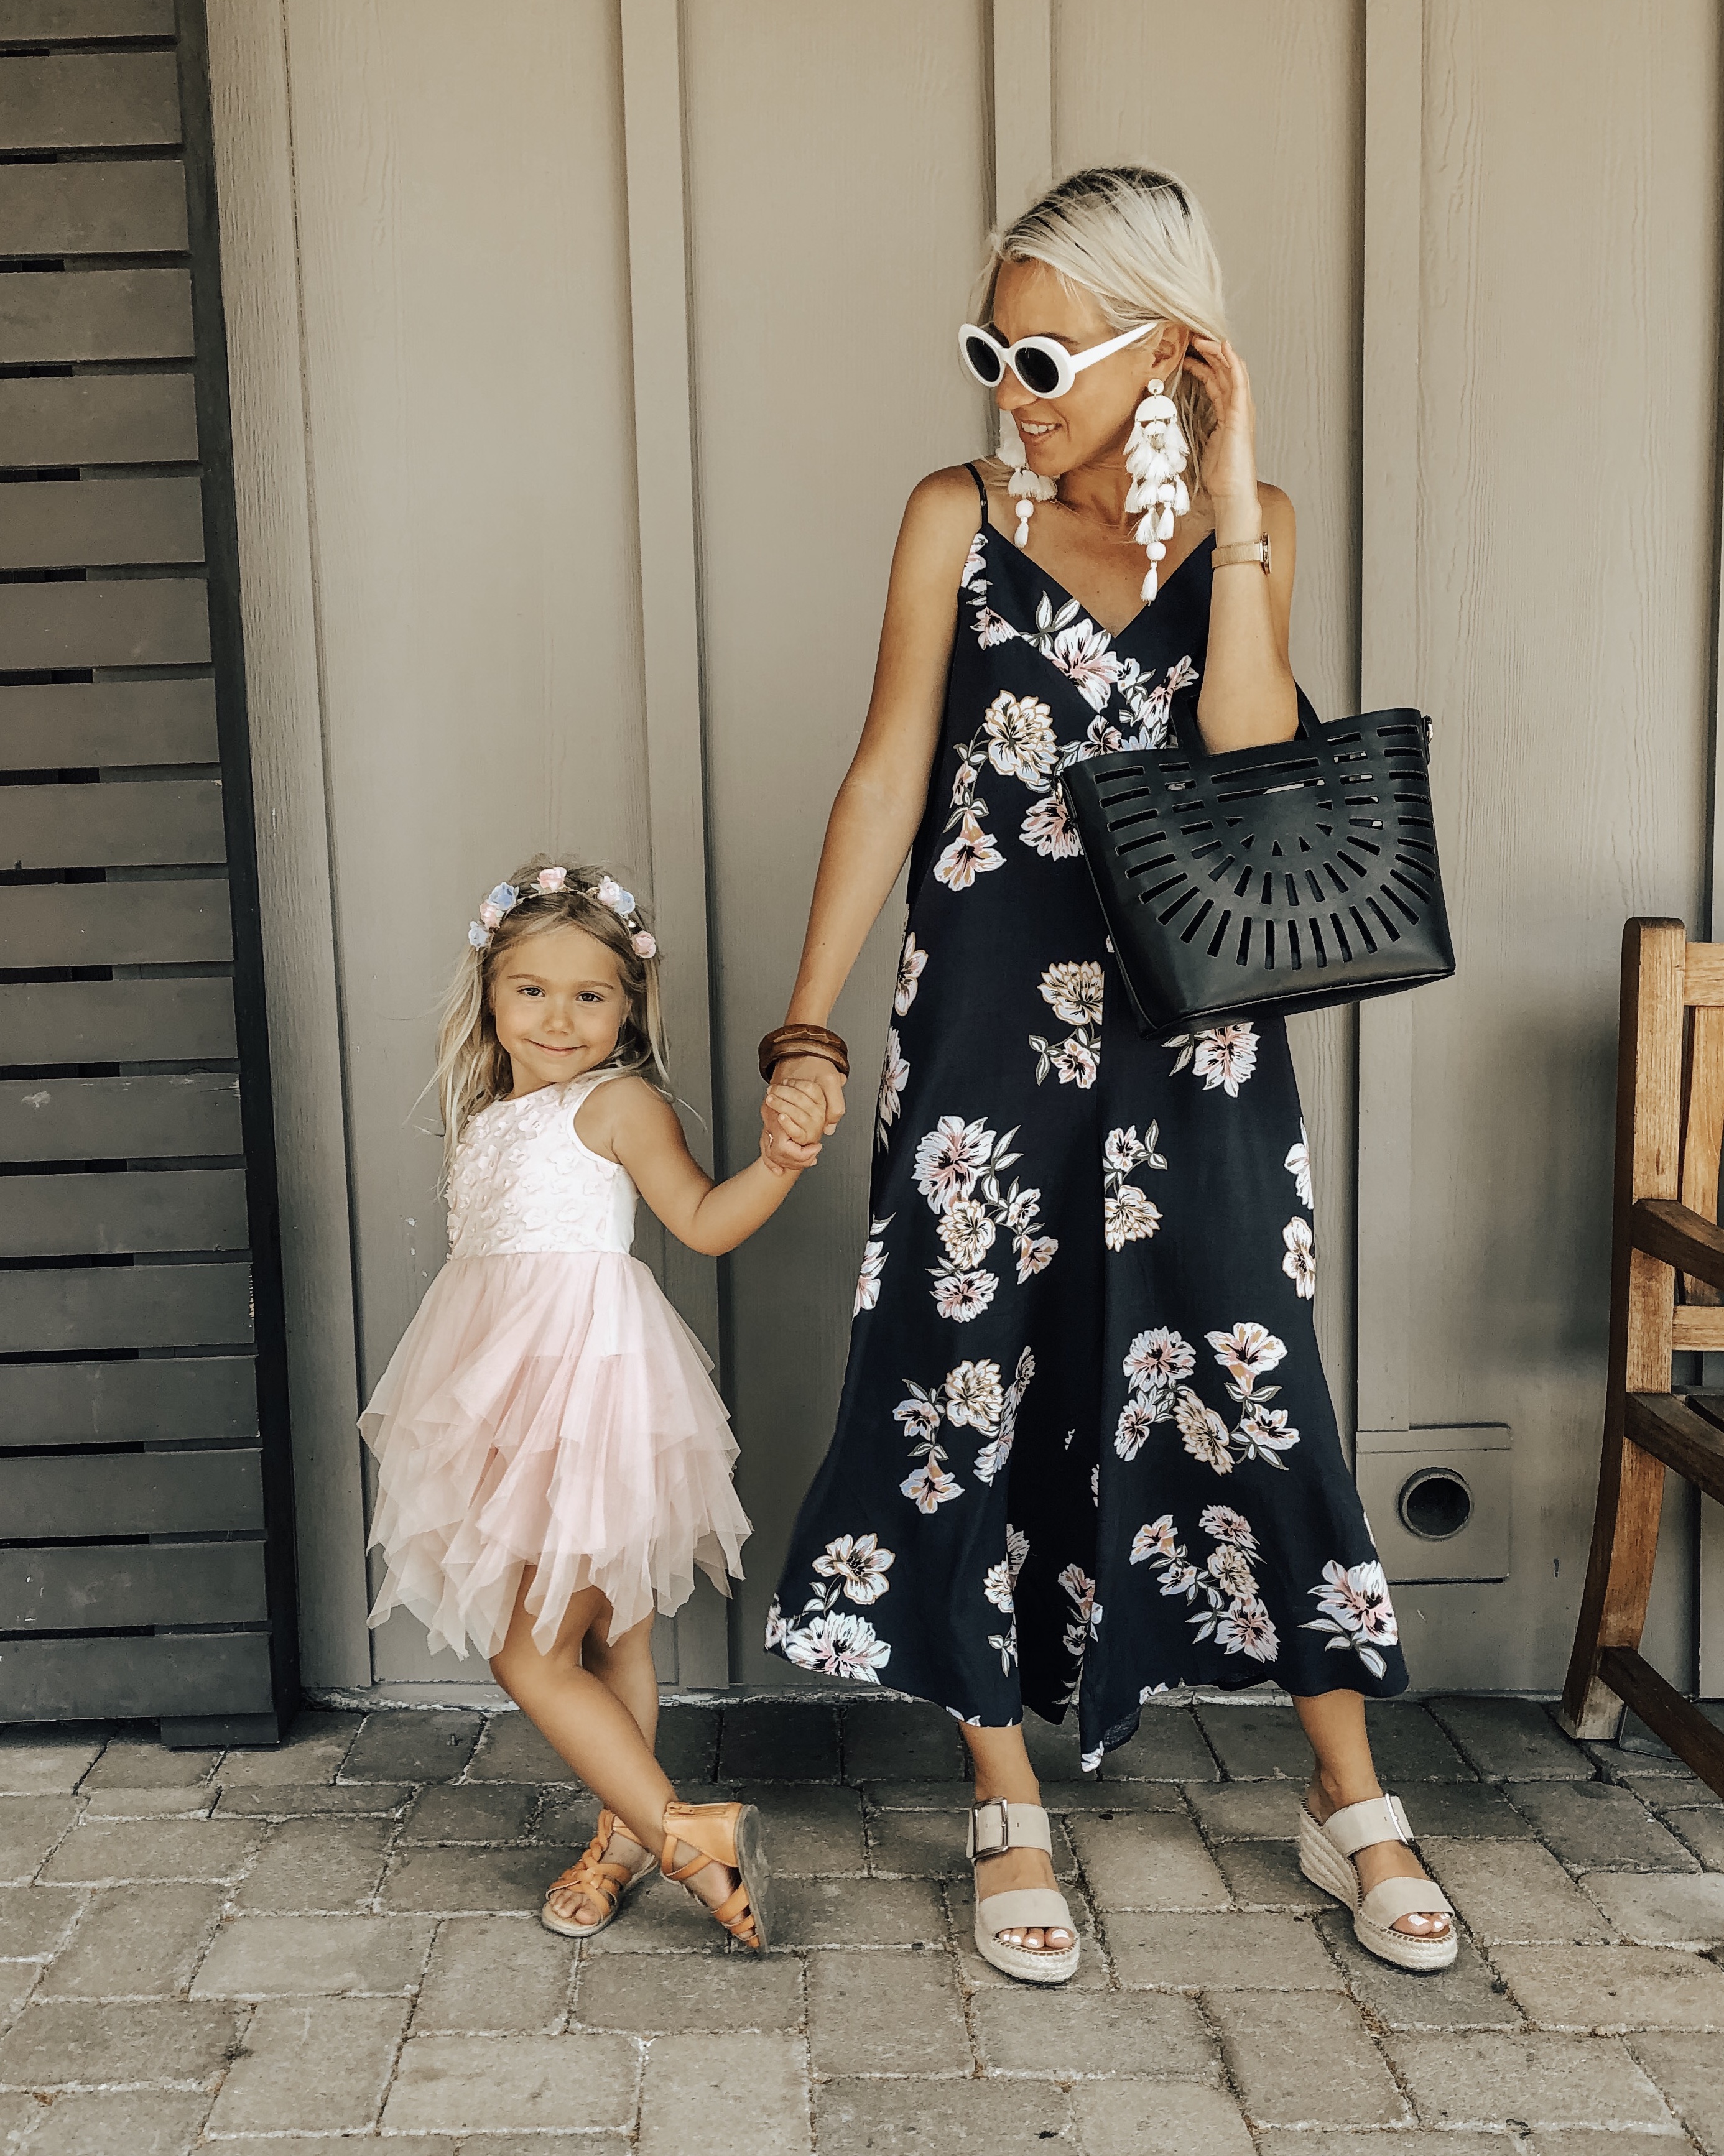 NEW SPRING DRESSES + JUMPSUITS FROM TARGET - Jaclyn De Leon Style + Looking for the perfect Spring dress at an affordable price? I'm sharing my top picks from pretty florals to retro stripes and they're all from Target.